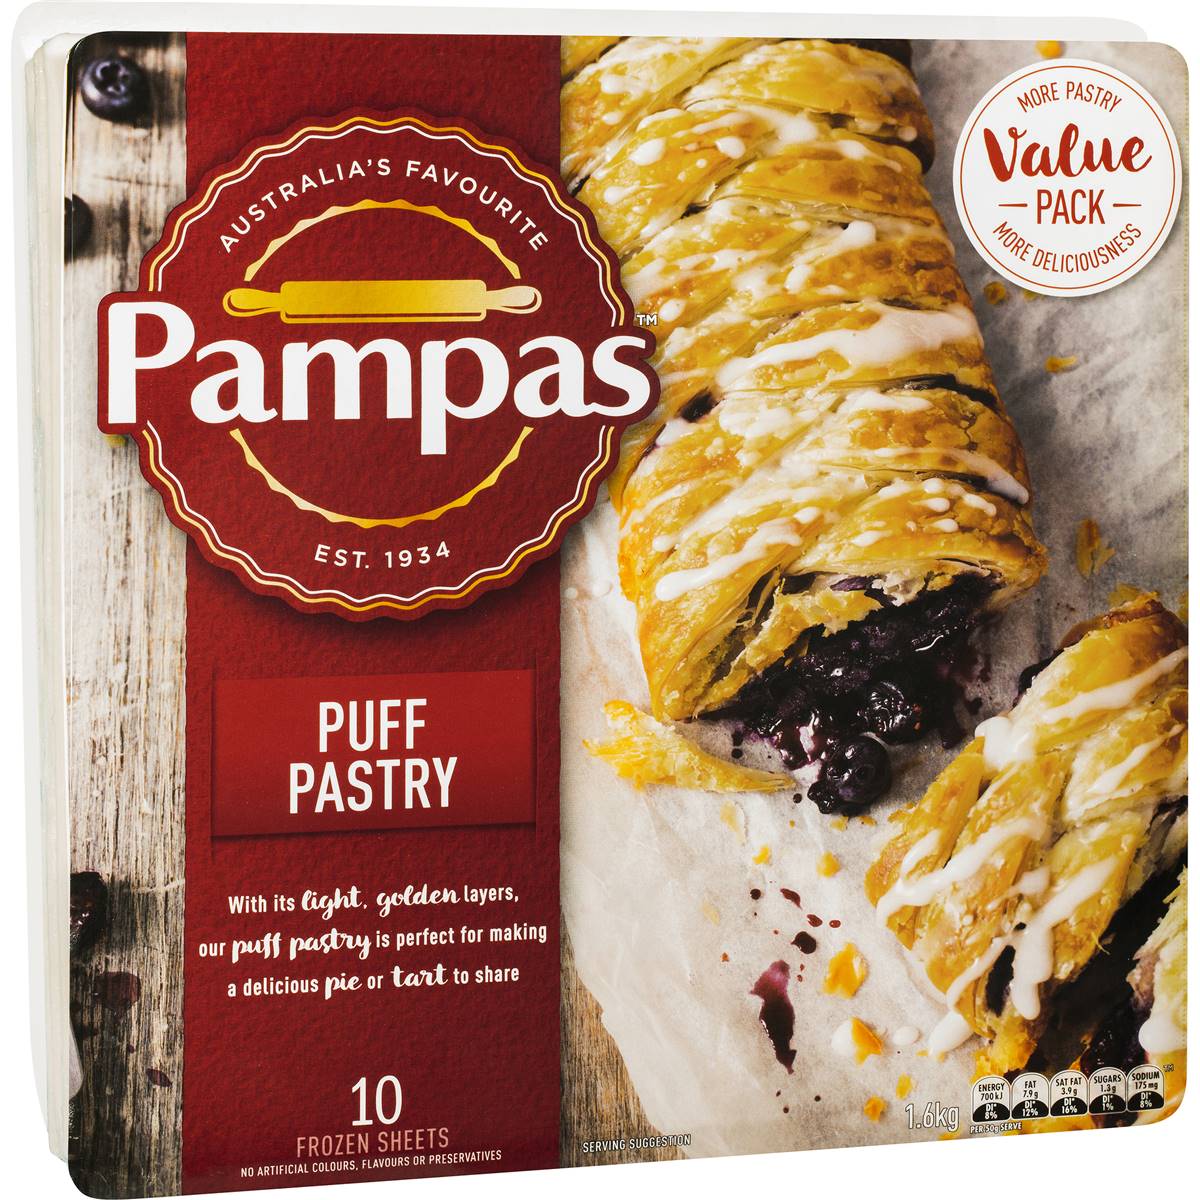 Pampas Puff Pastry 1.6kg